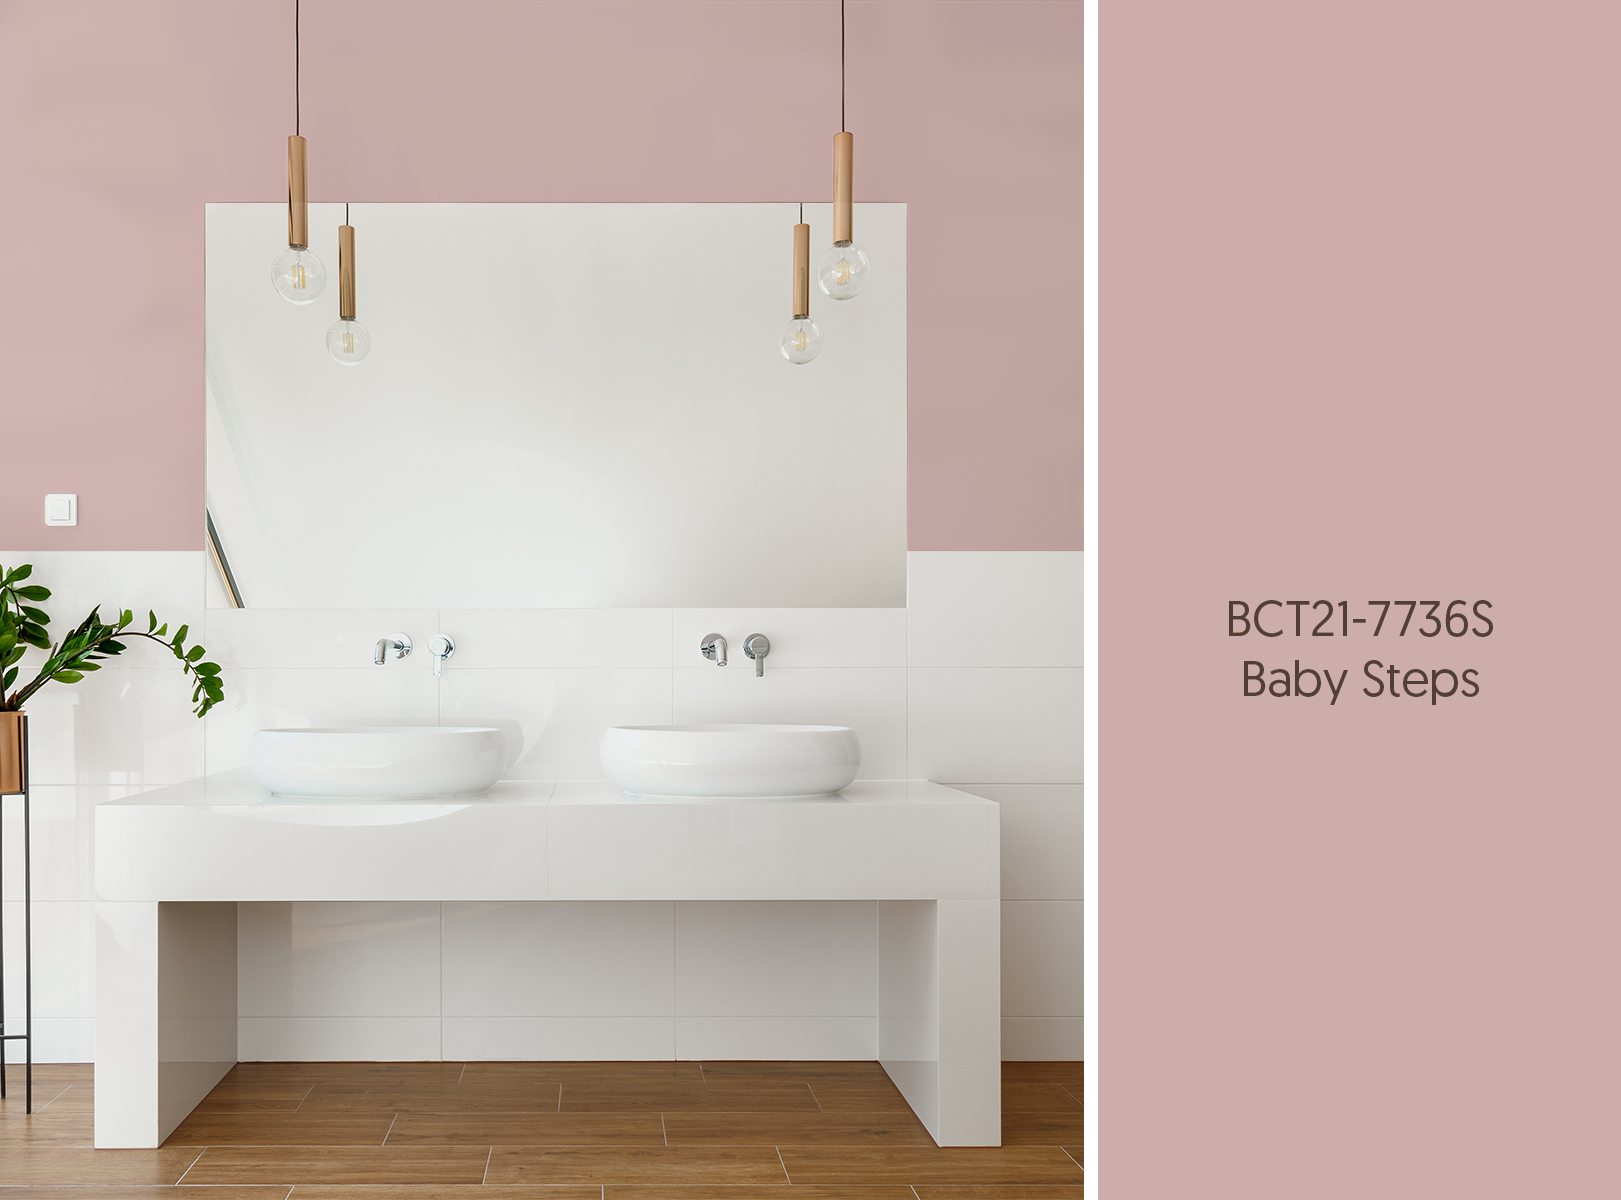 6 Bathroom Paint Colors to Create a Relaxing Space | MyBoysen